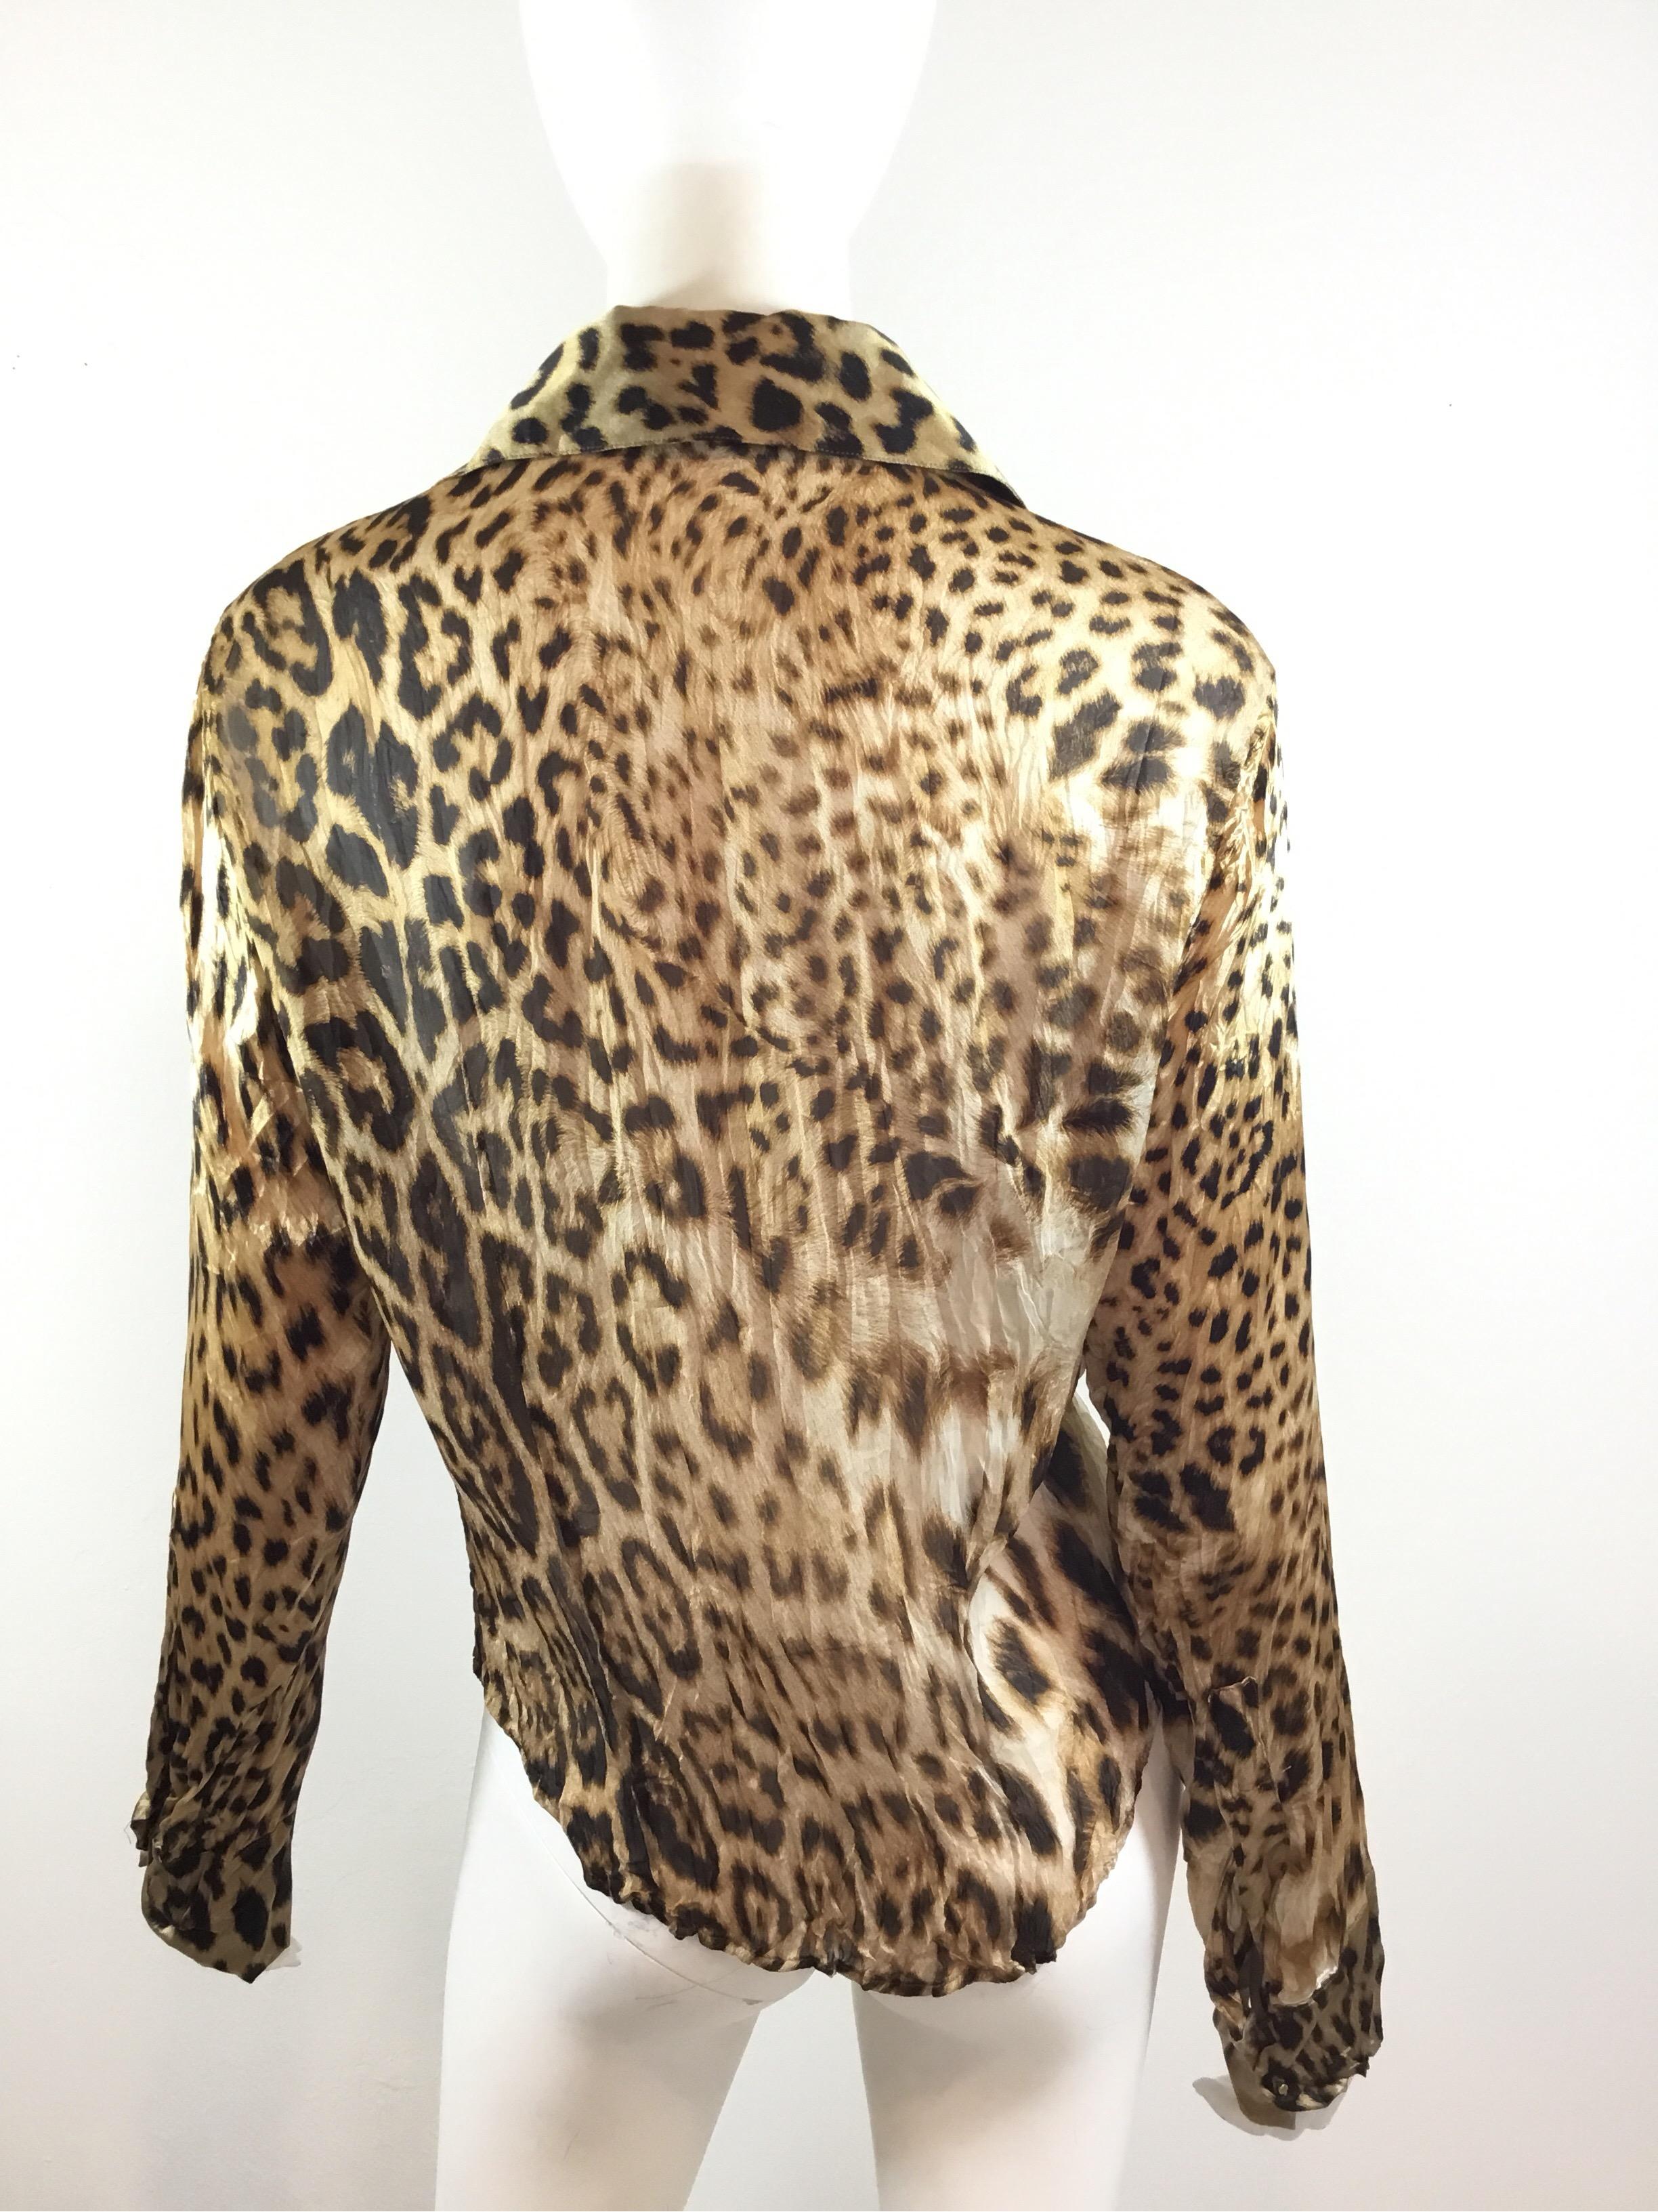 Roberto Cavalli blouse features a leopard print with goldtone button closures along the front and on the cuffs as well. Composed of 100% silk, made in Italy, labeled Size XL.

Bust 44”, sleeves 24”, length 25”, shoulder to shoulder 17”